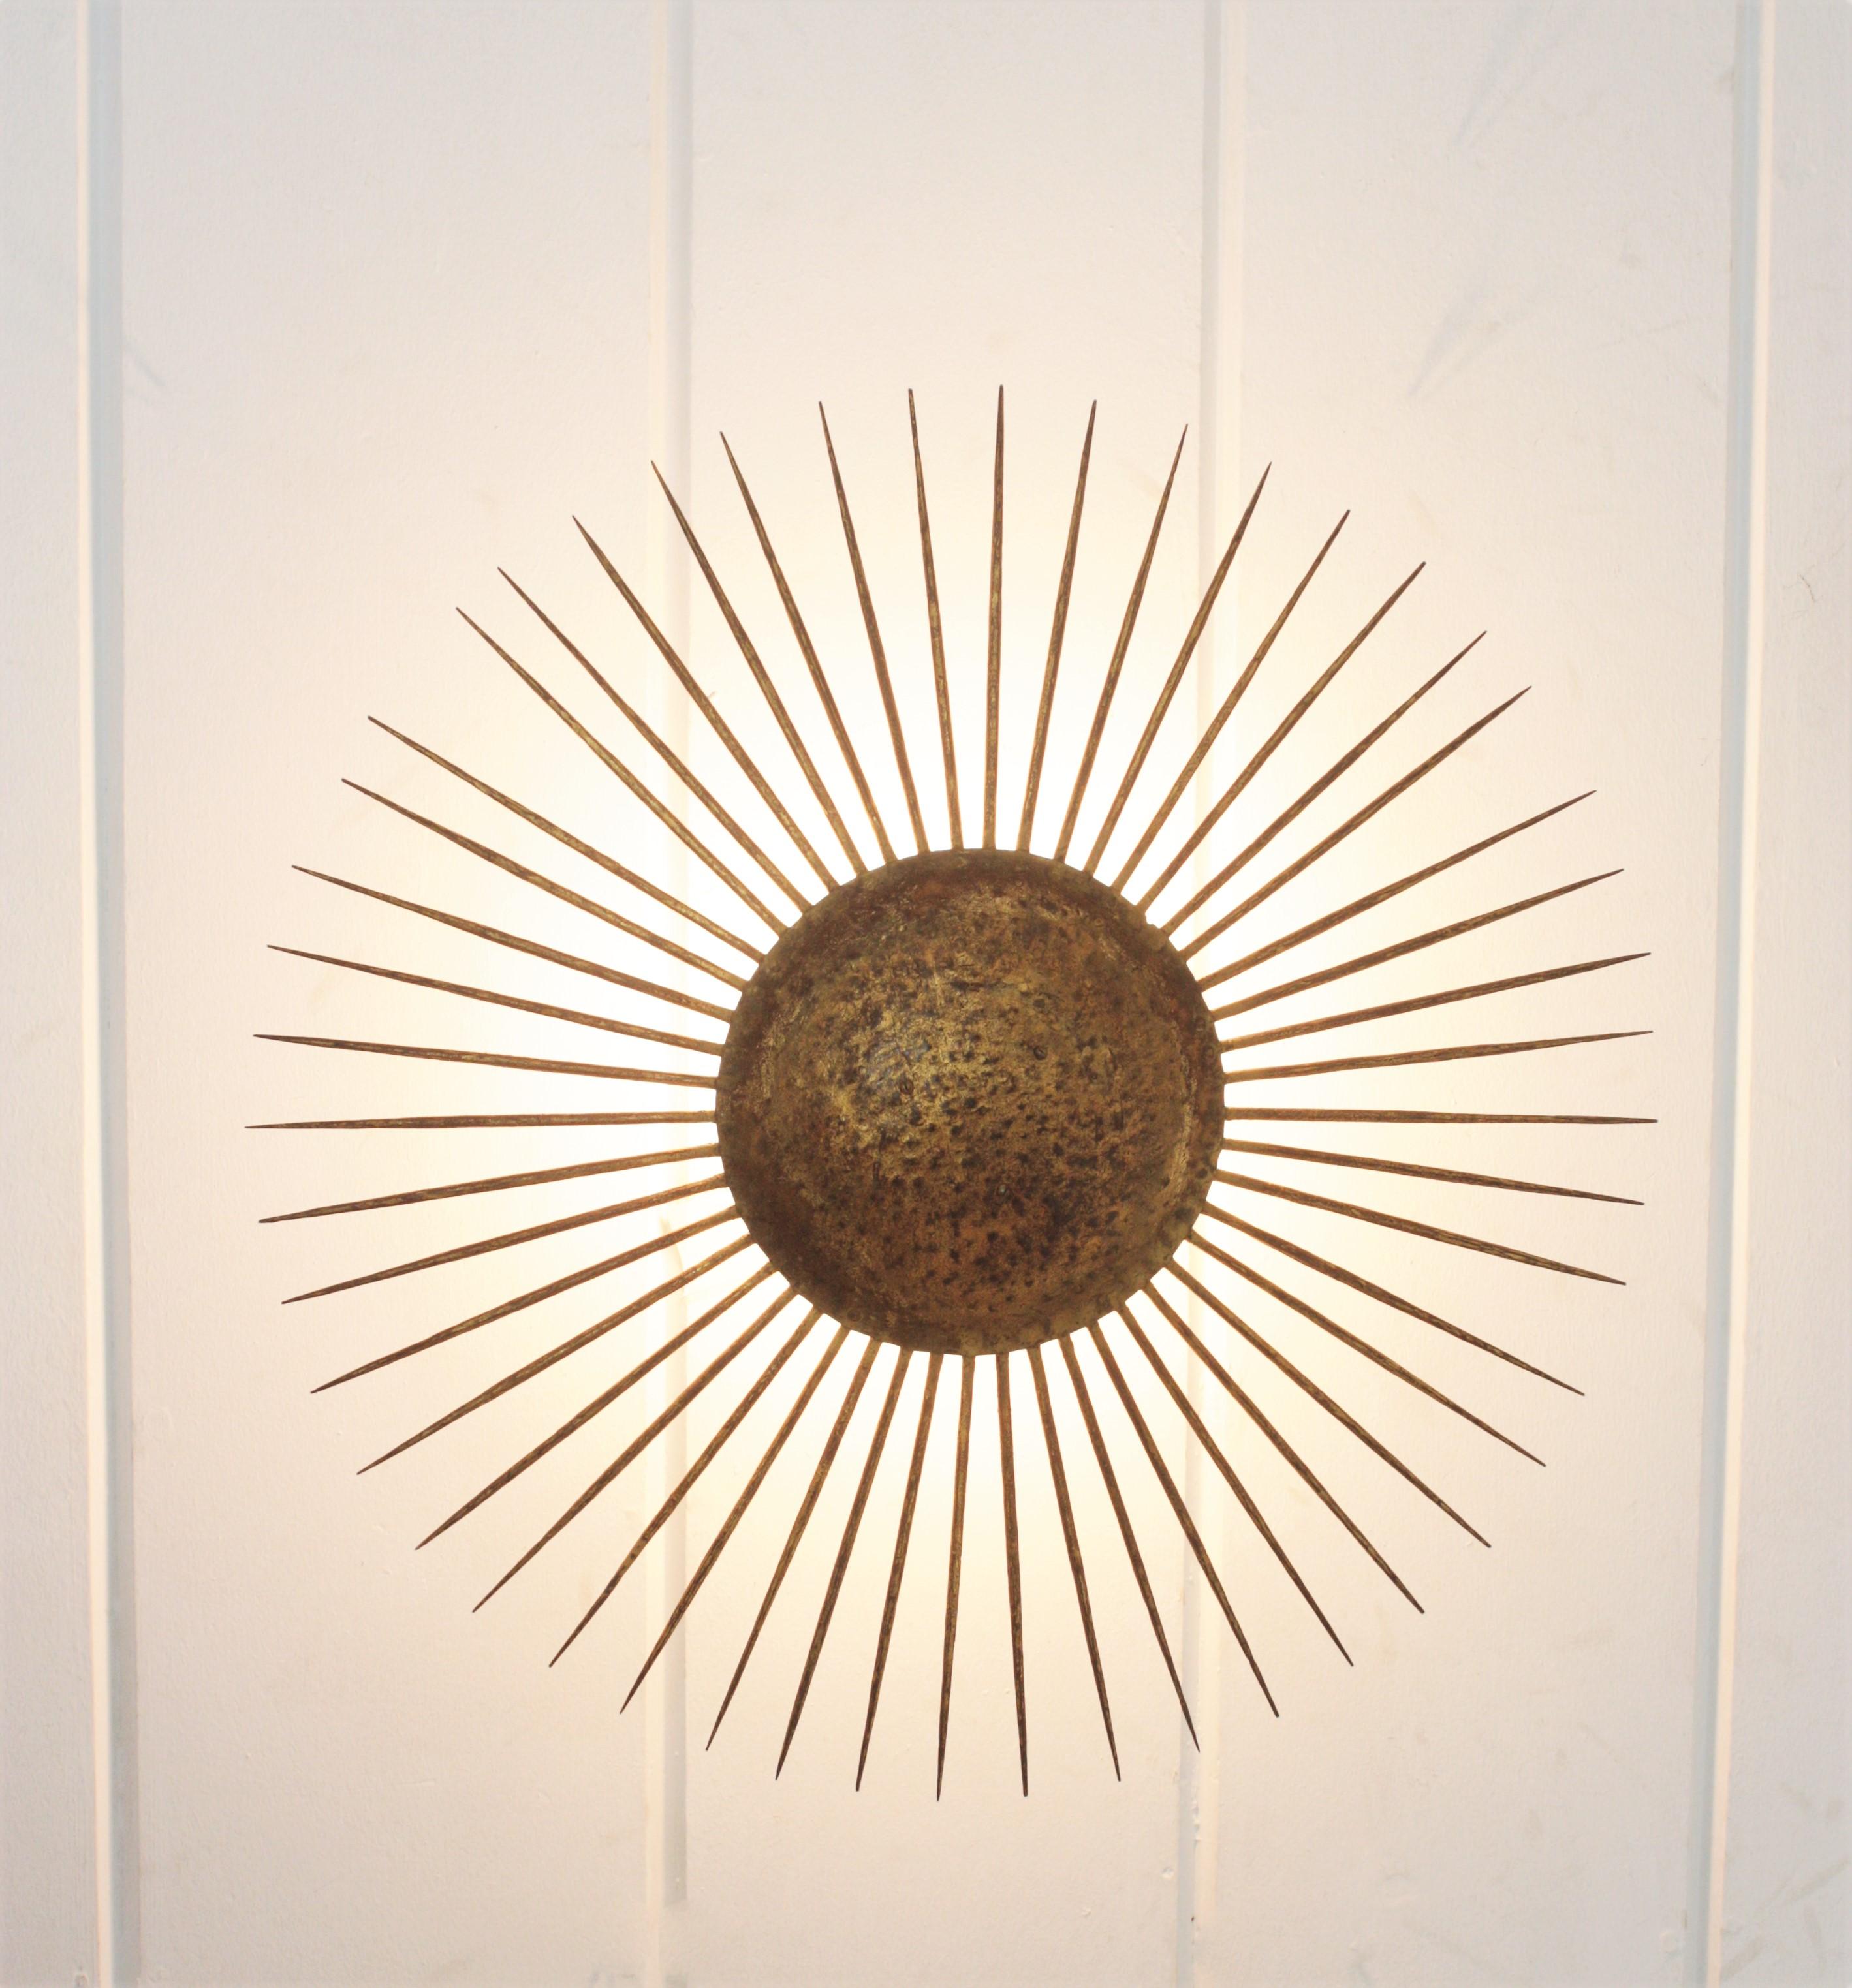 French Sunburst Ceiling Light Fixture in Gilt Wrought Iron, 1940s For Sale 1